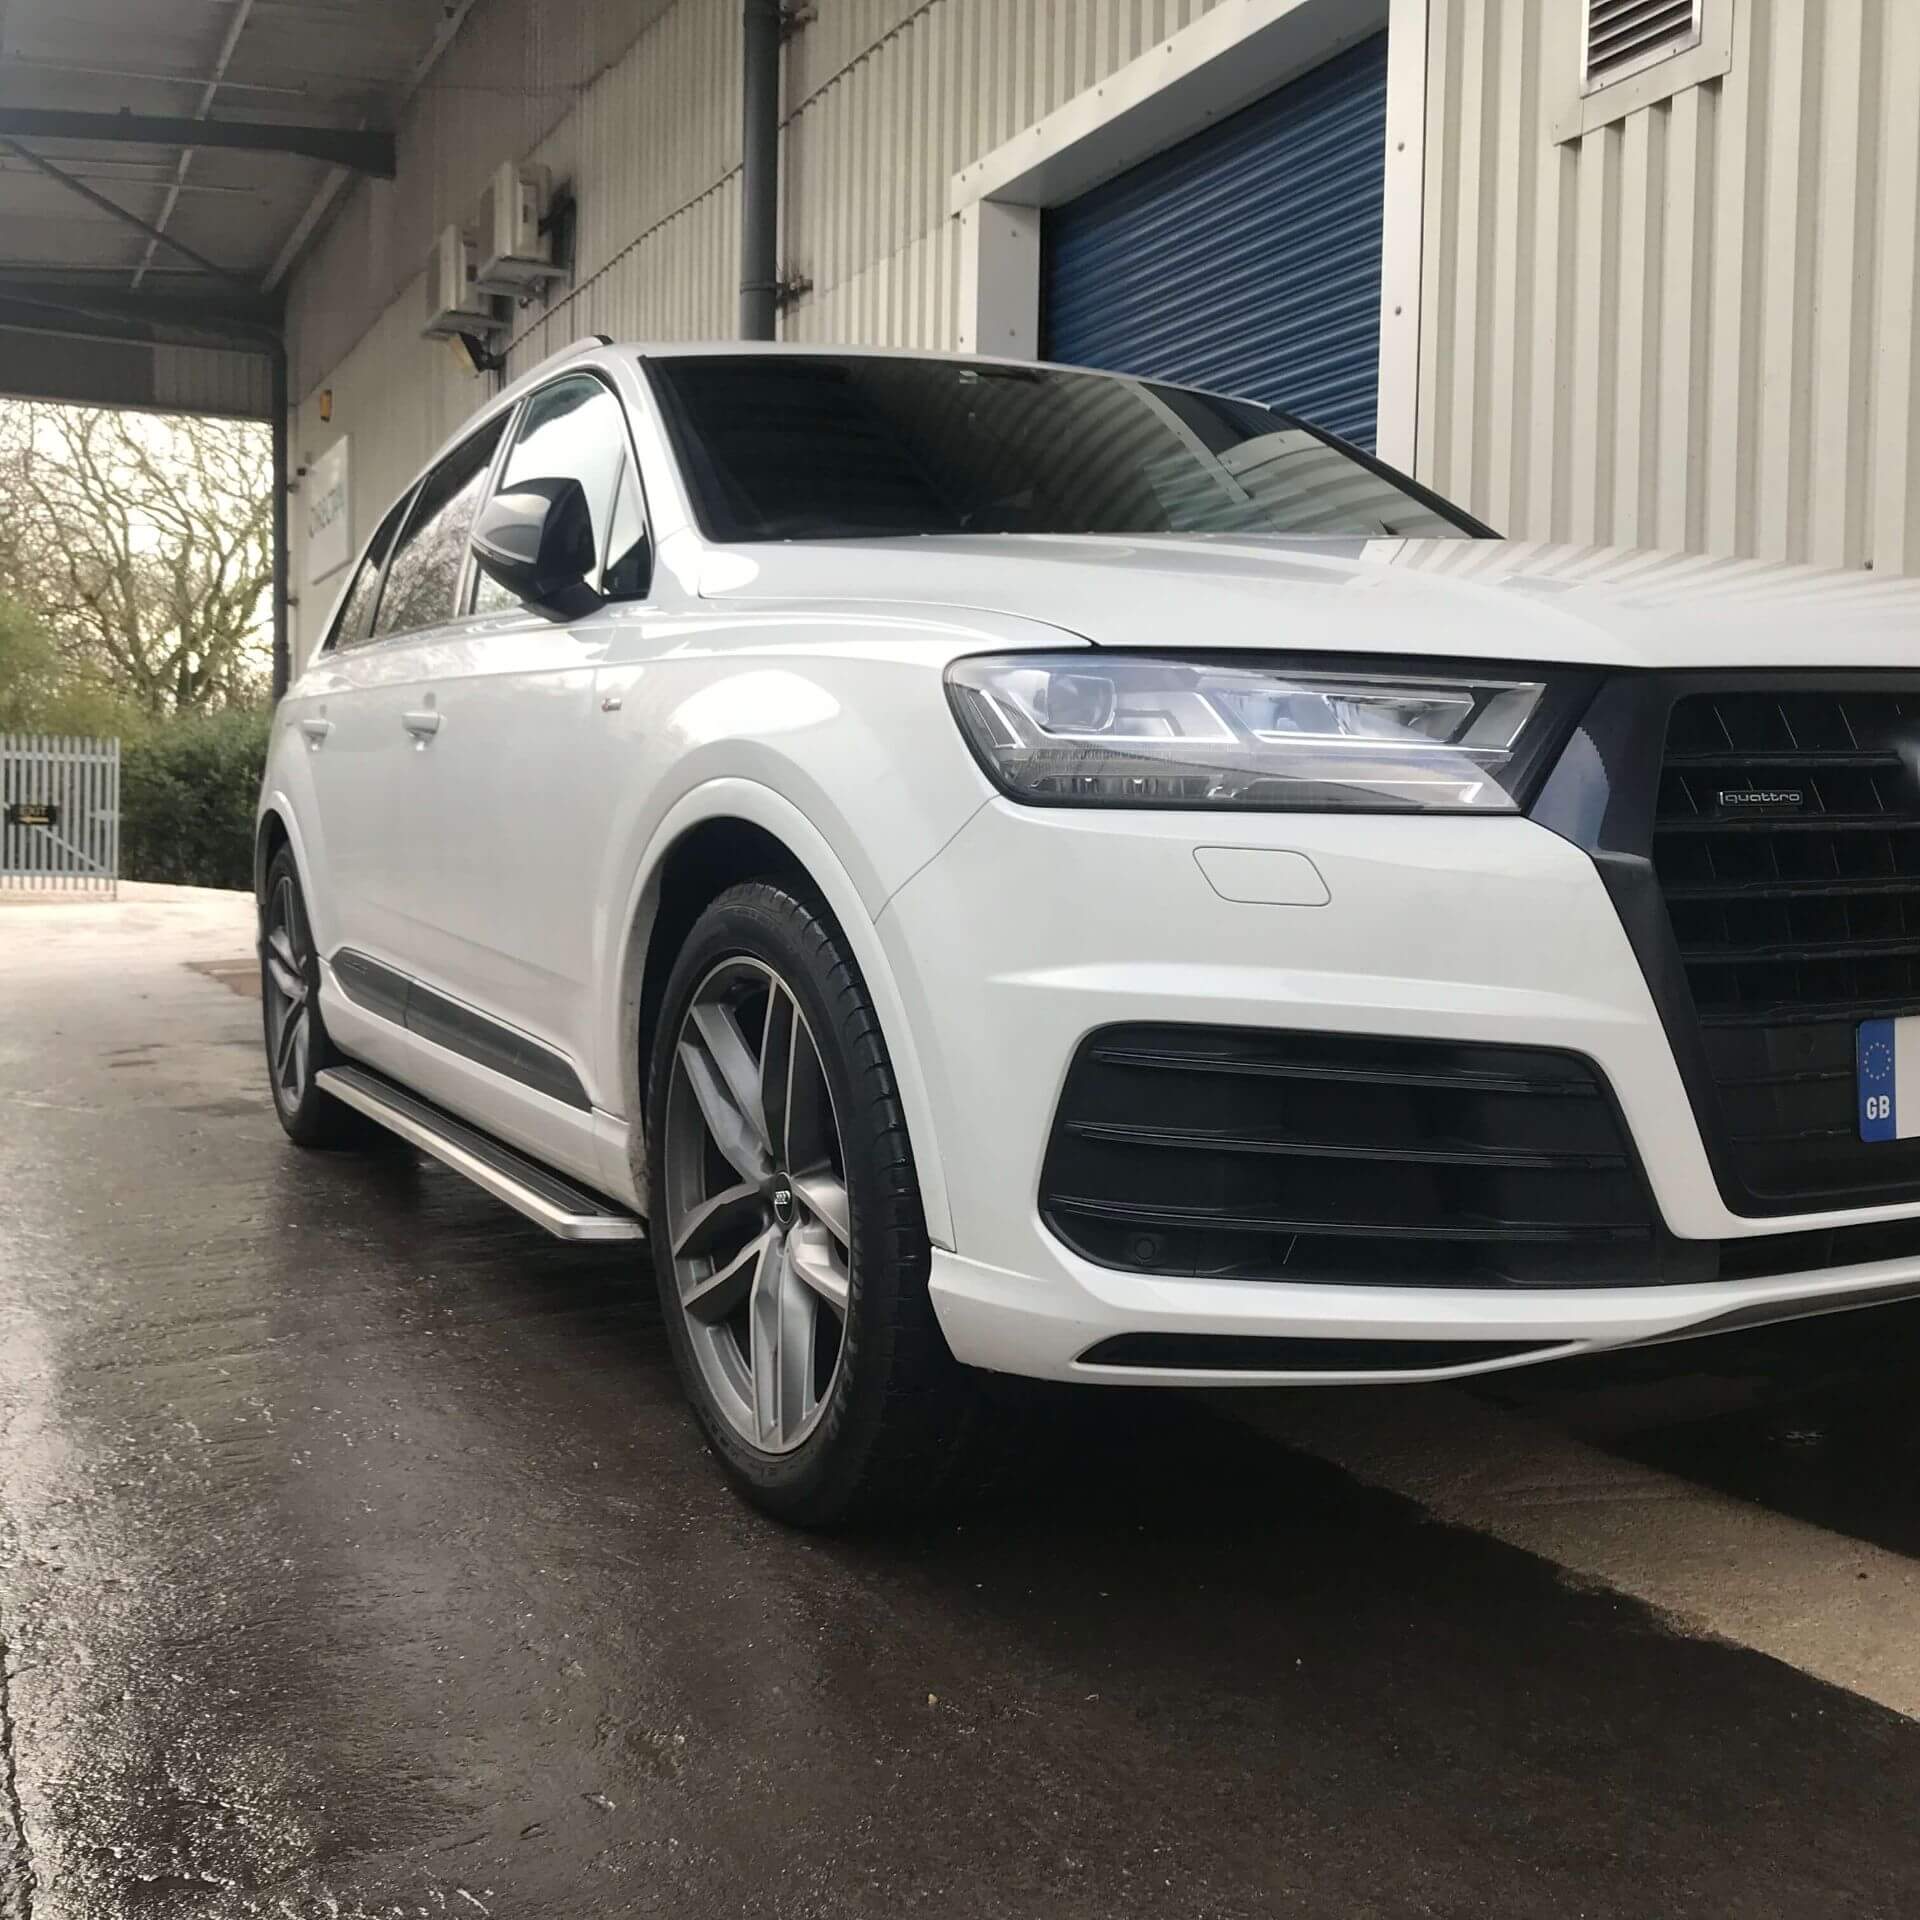 OE Style Side Steps Running Boards for Audi Q7 2016-2019 -  - sold by Direct4x4